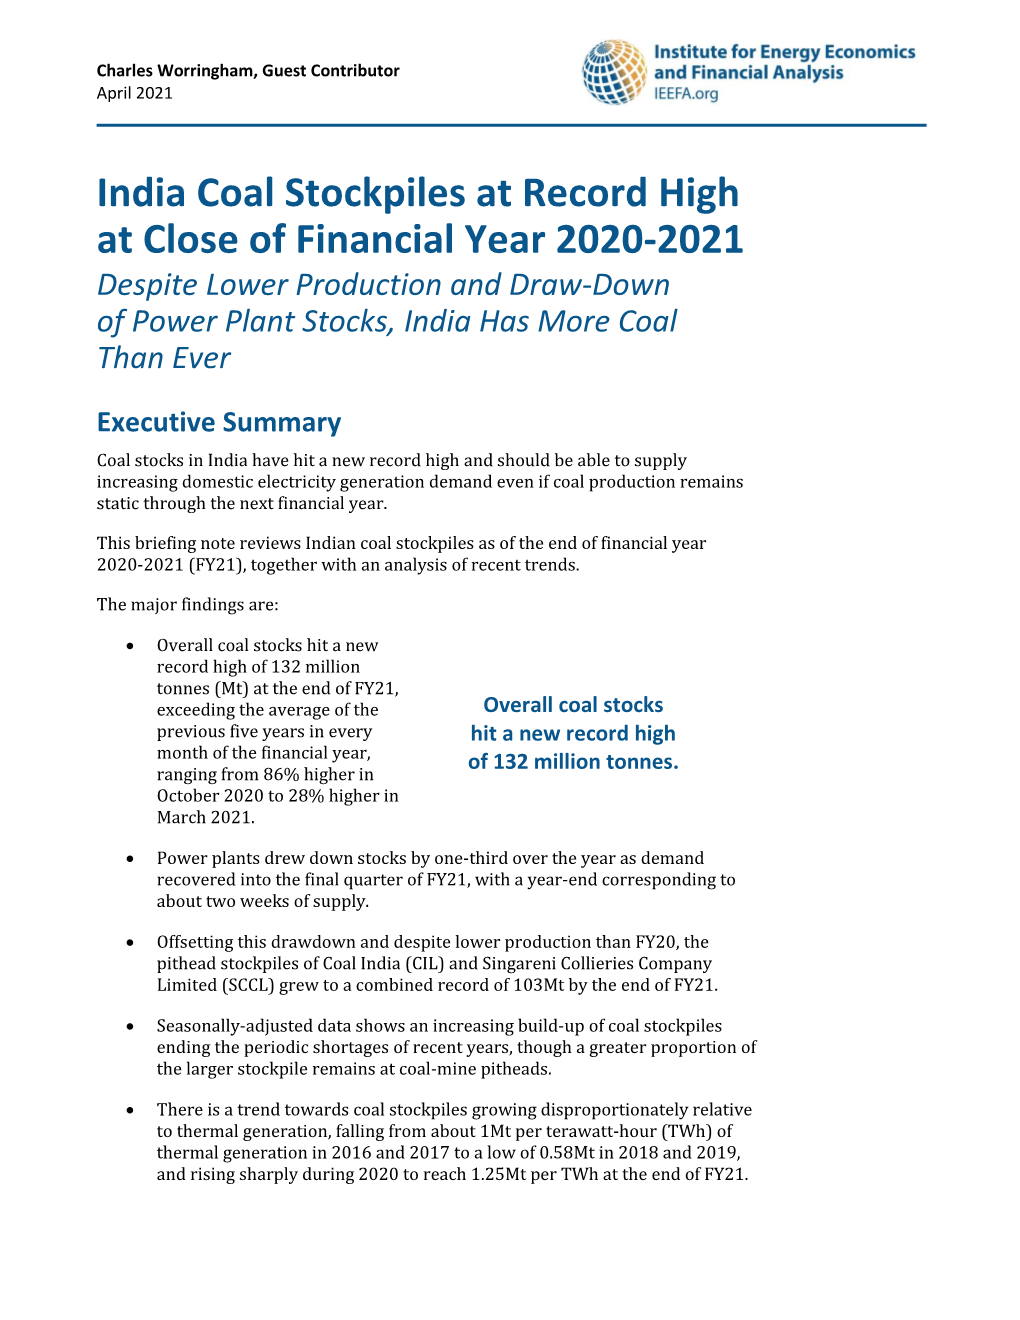 India Coal Stockpiles at Record High at Close of Financial Year 2020-2021 Despite Lower Production and Draw-Down of Power Plant Stocks, India Has More Coal Than Ever